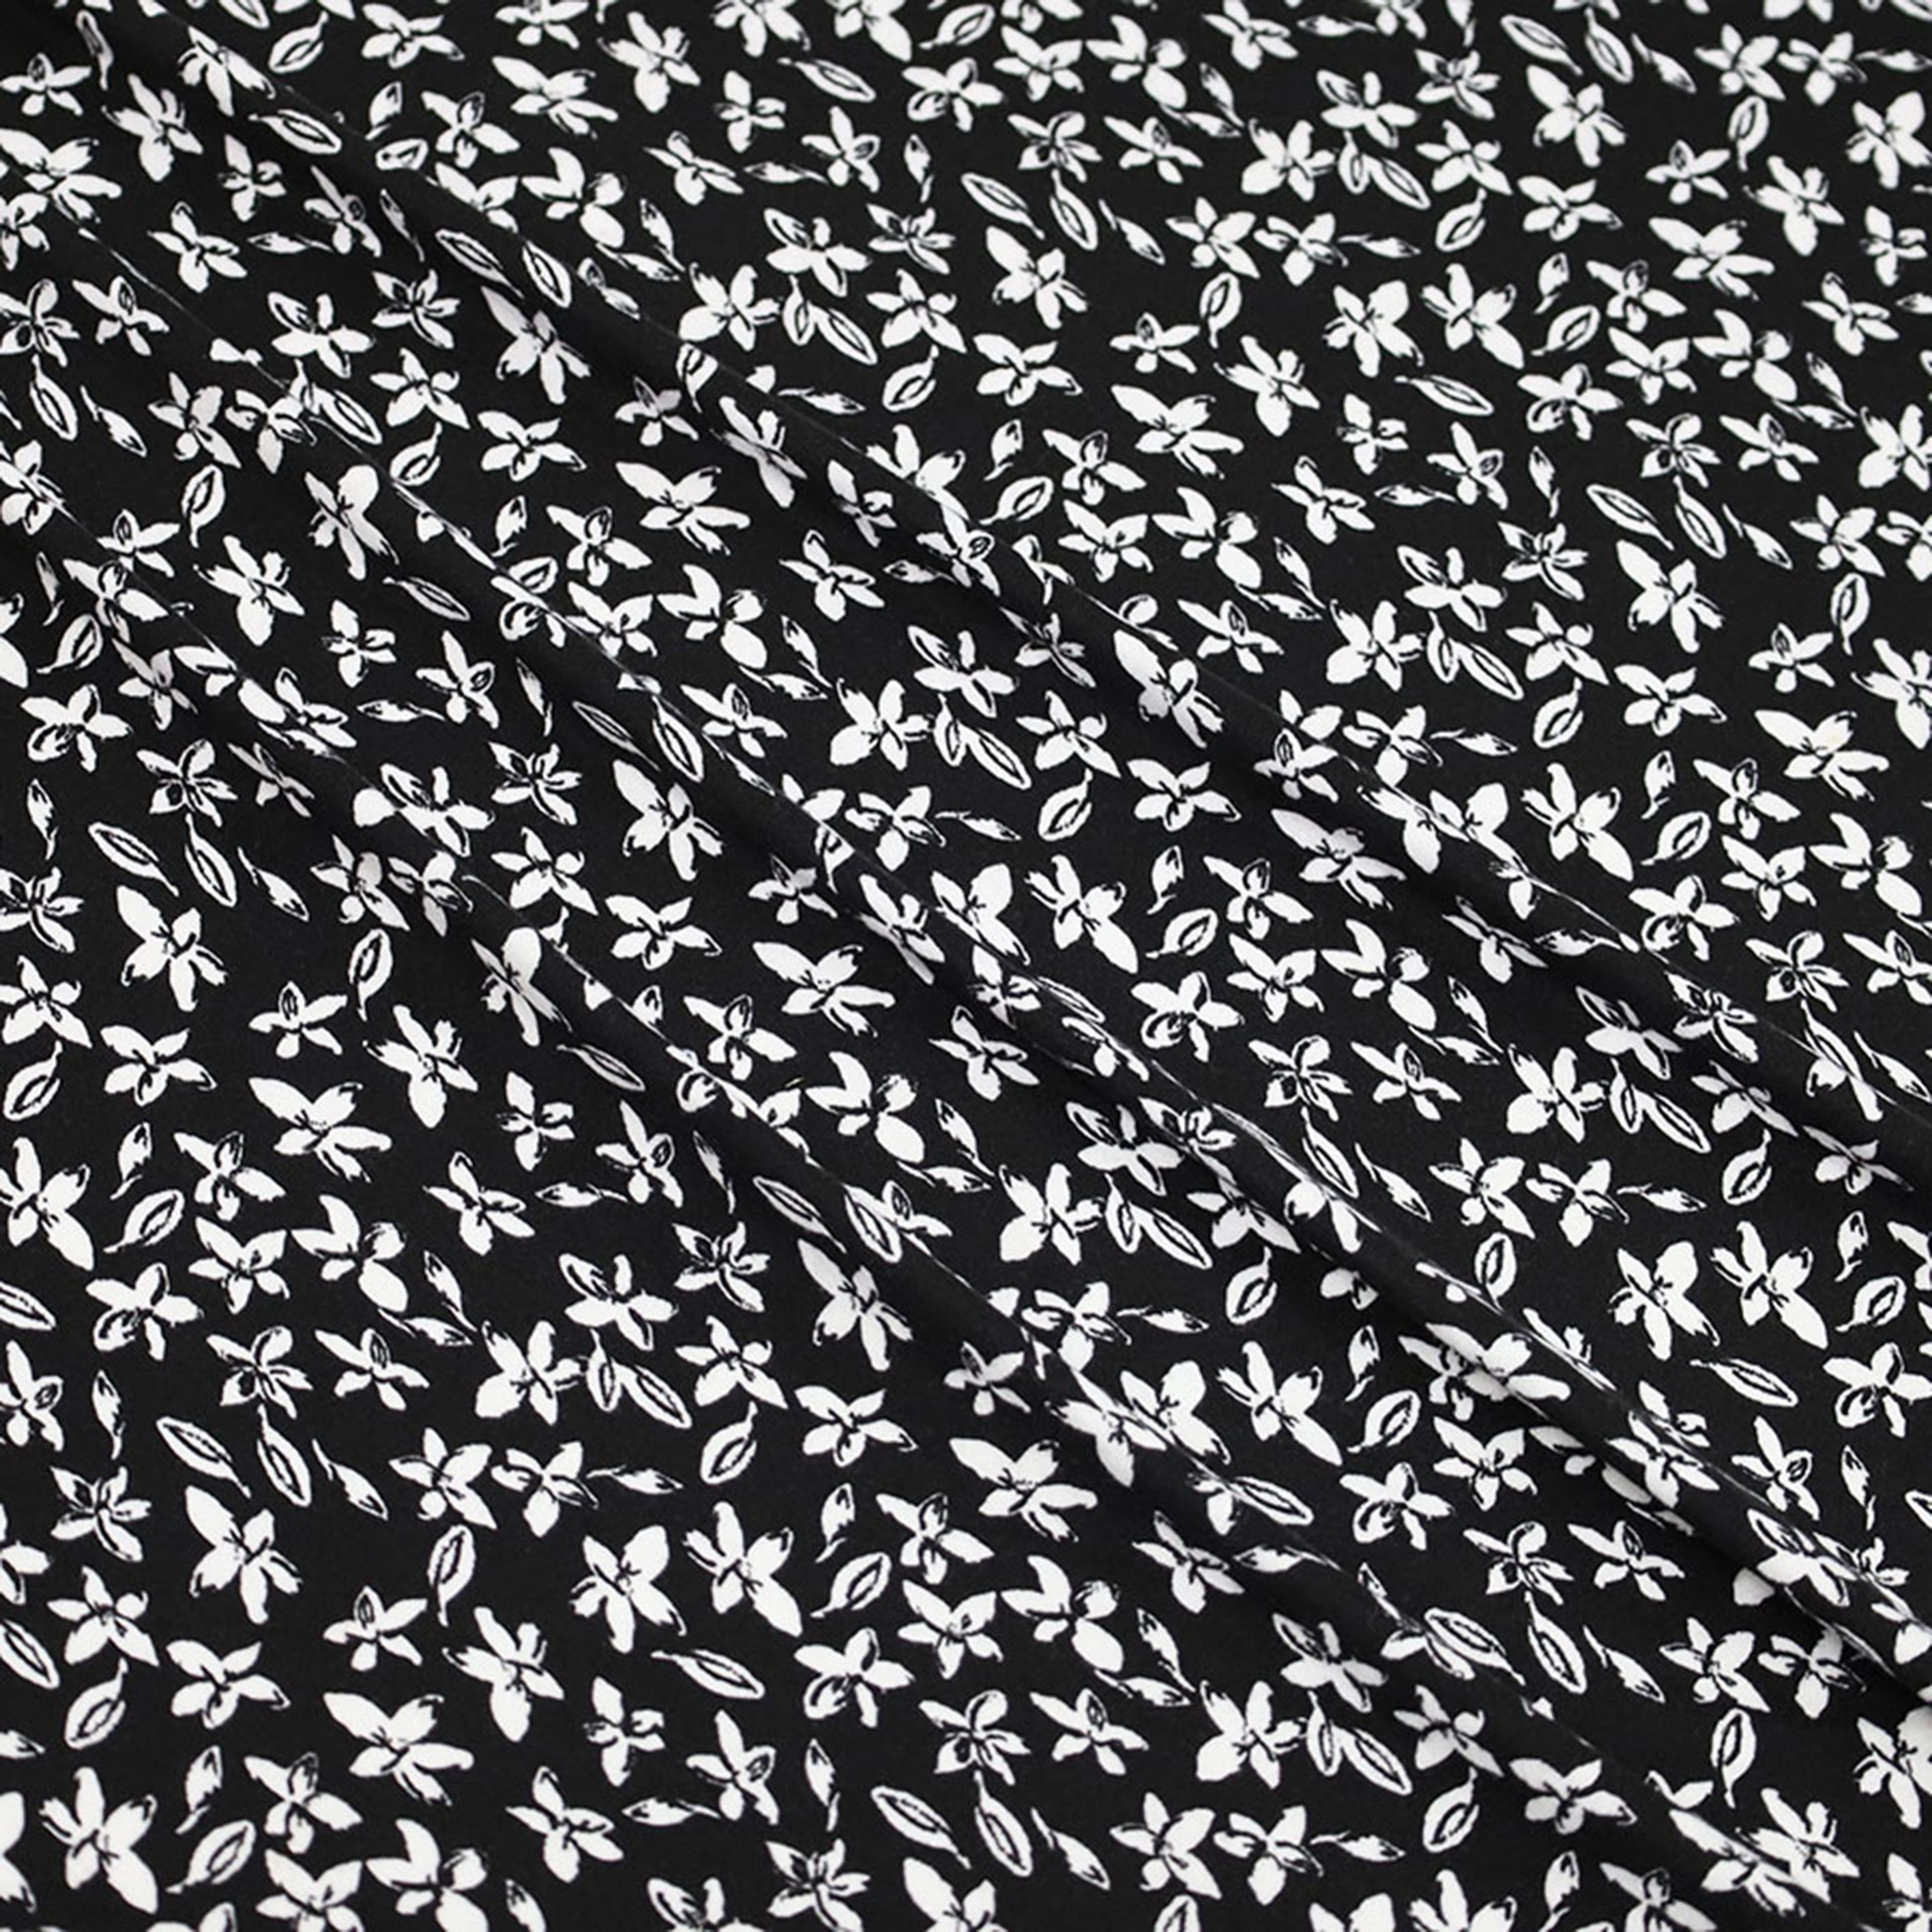 Fabric Merchants Leaves on Black Double Brushed Stretch Fabric